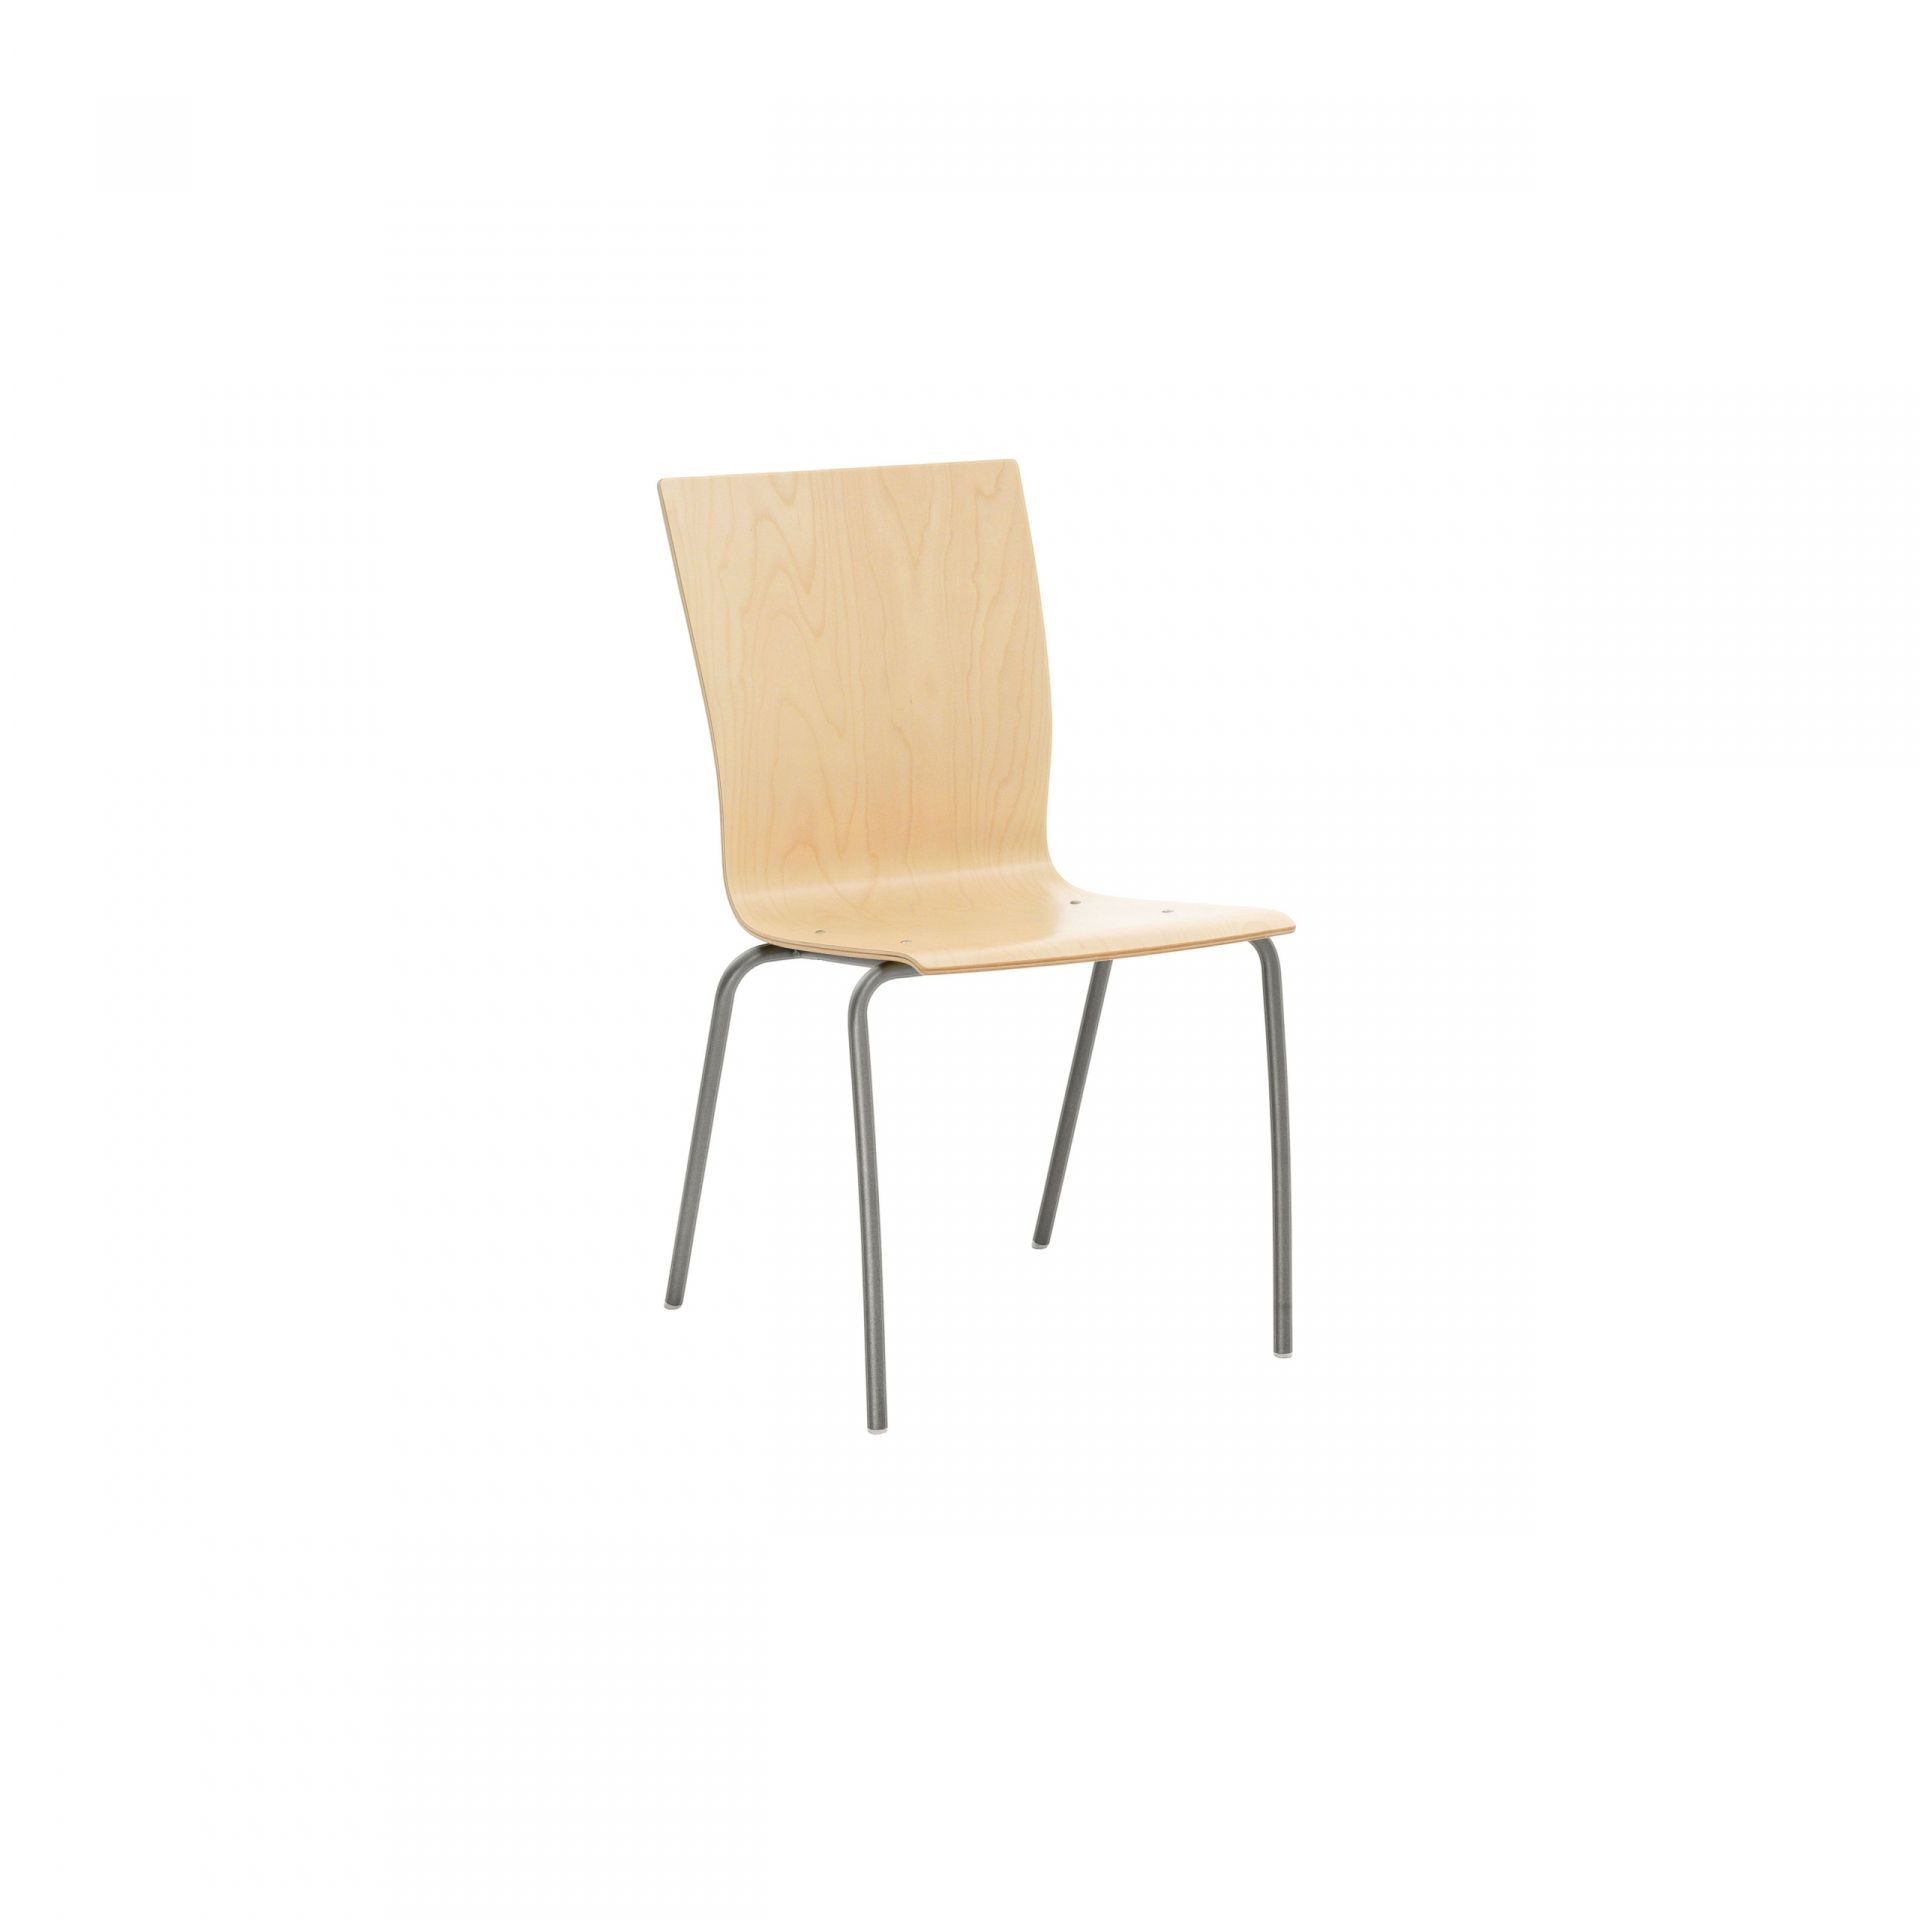 Sit Chair with metal legs product image 1